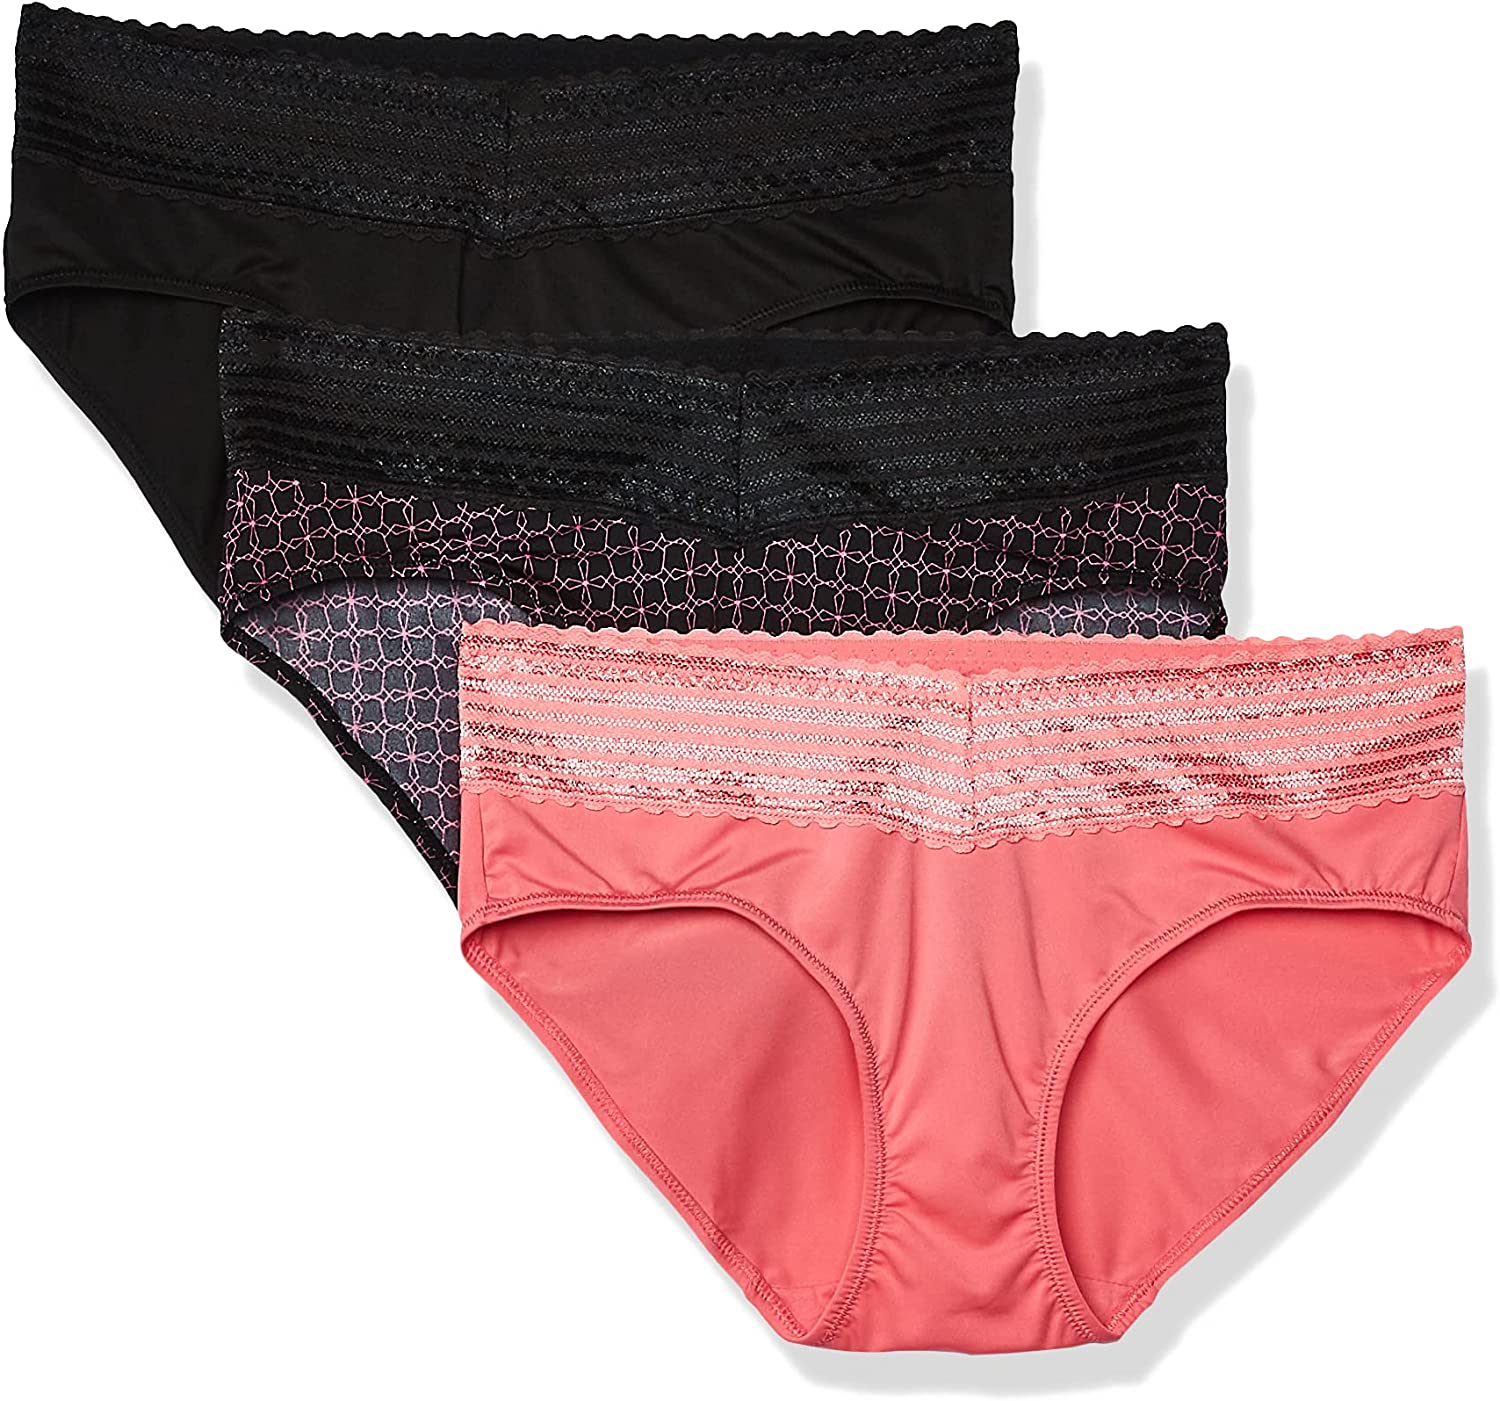 Buy Warner's Blissful Benefits No Muffin Top 3 Pack Hipster Panties online